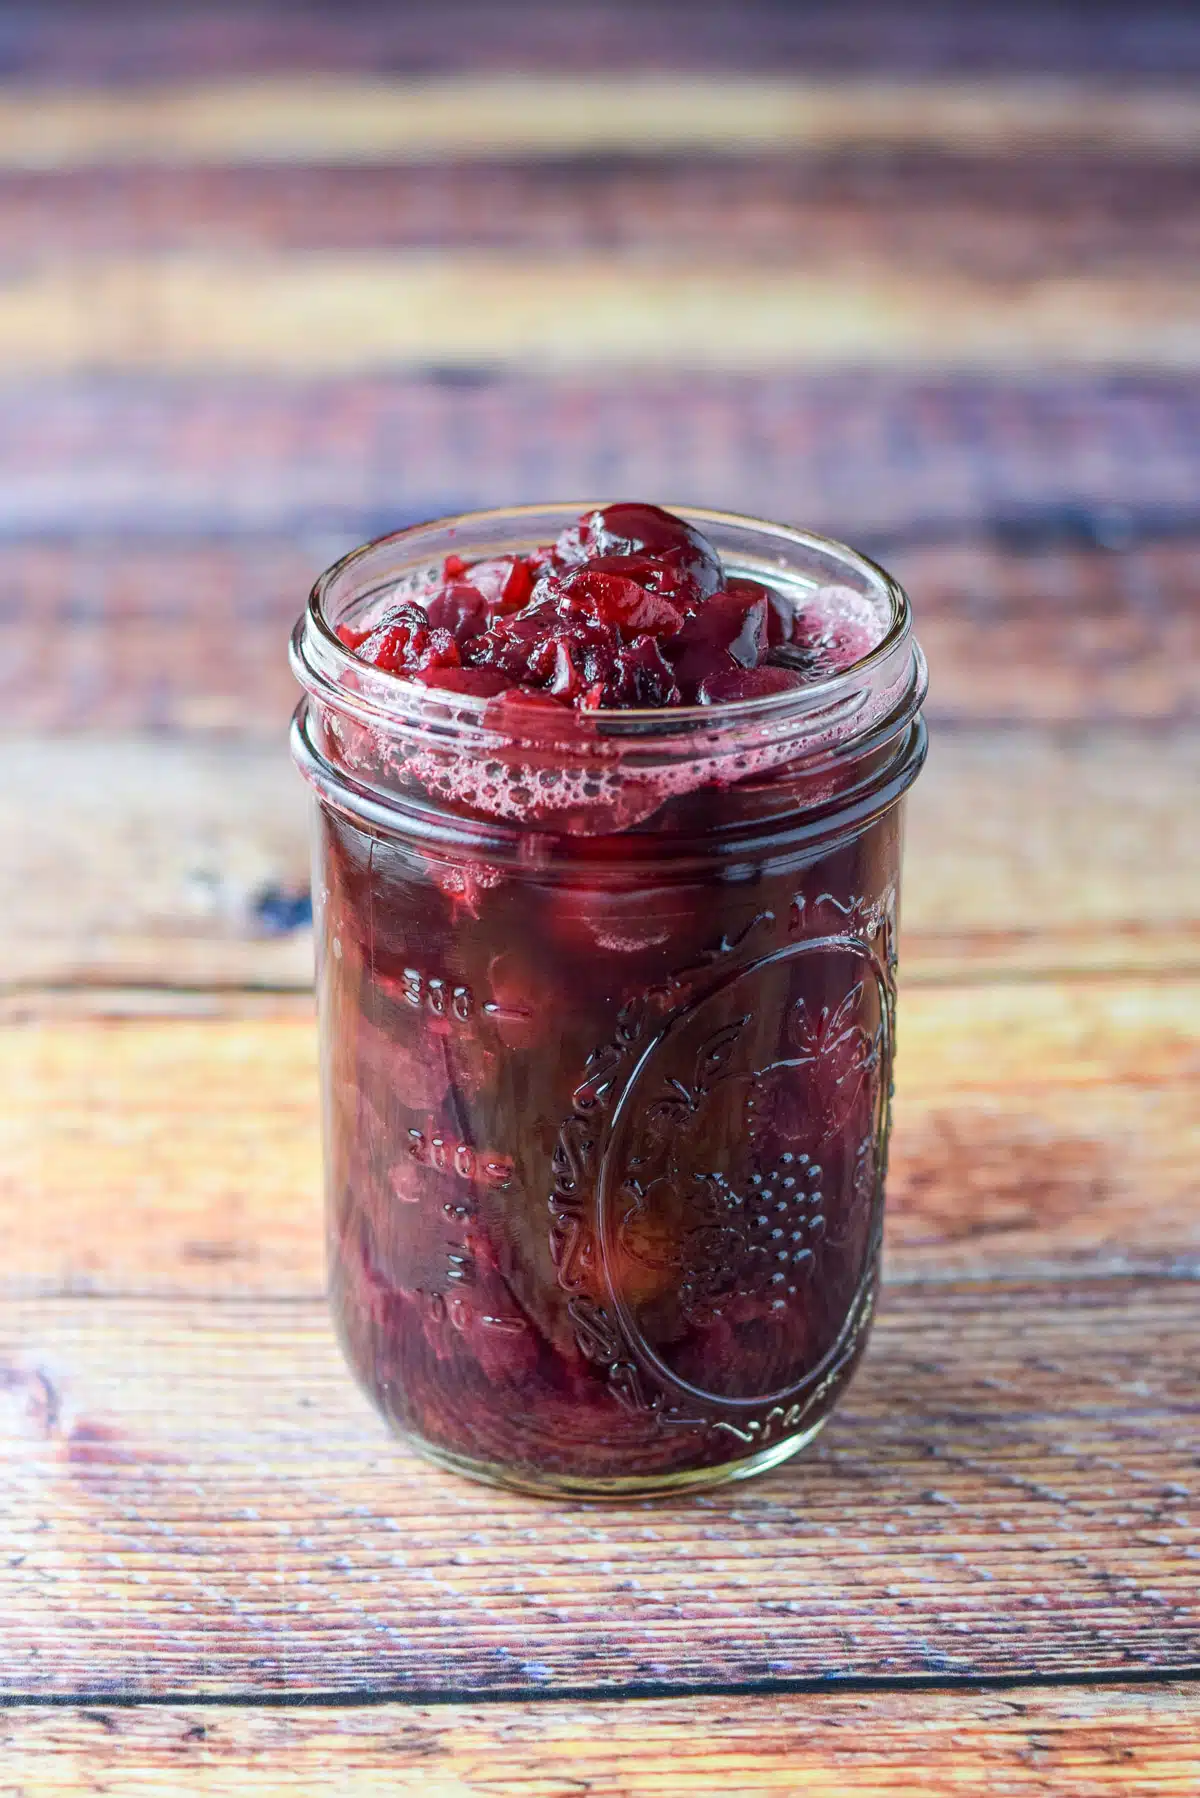 Jar of cherry sauce on a wooden table